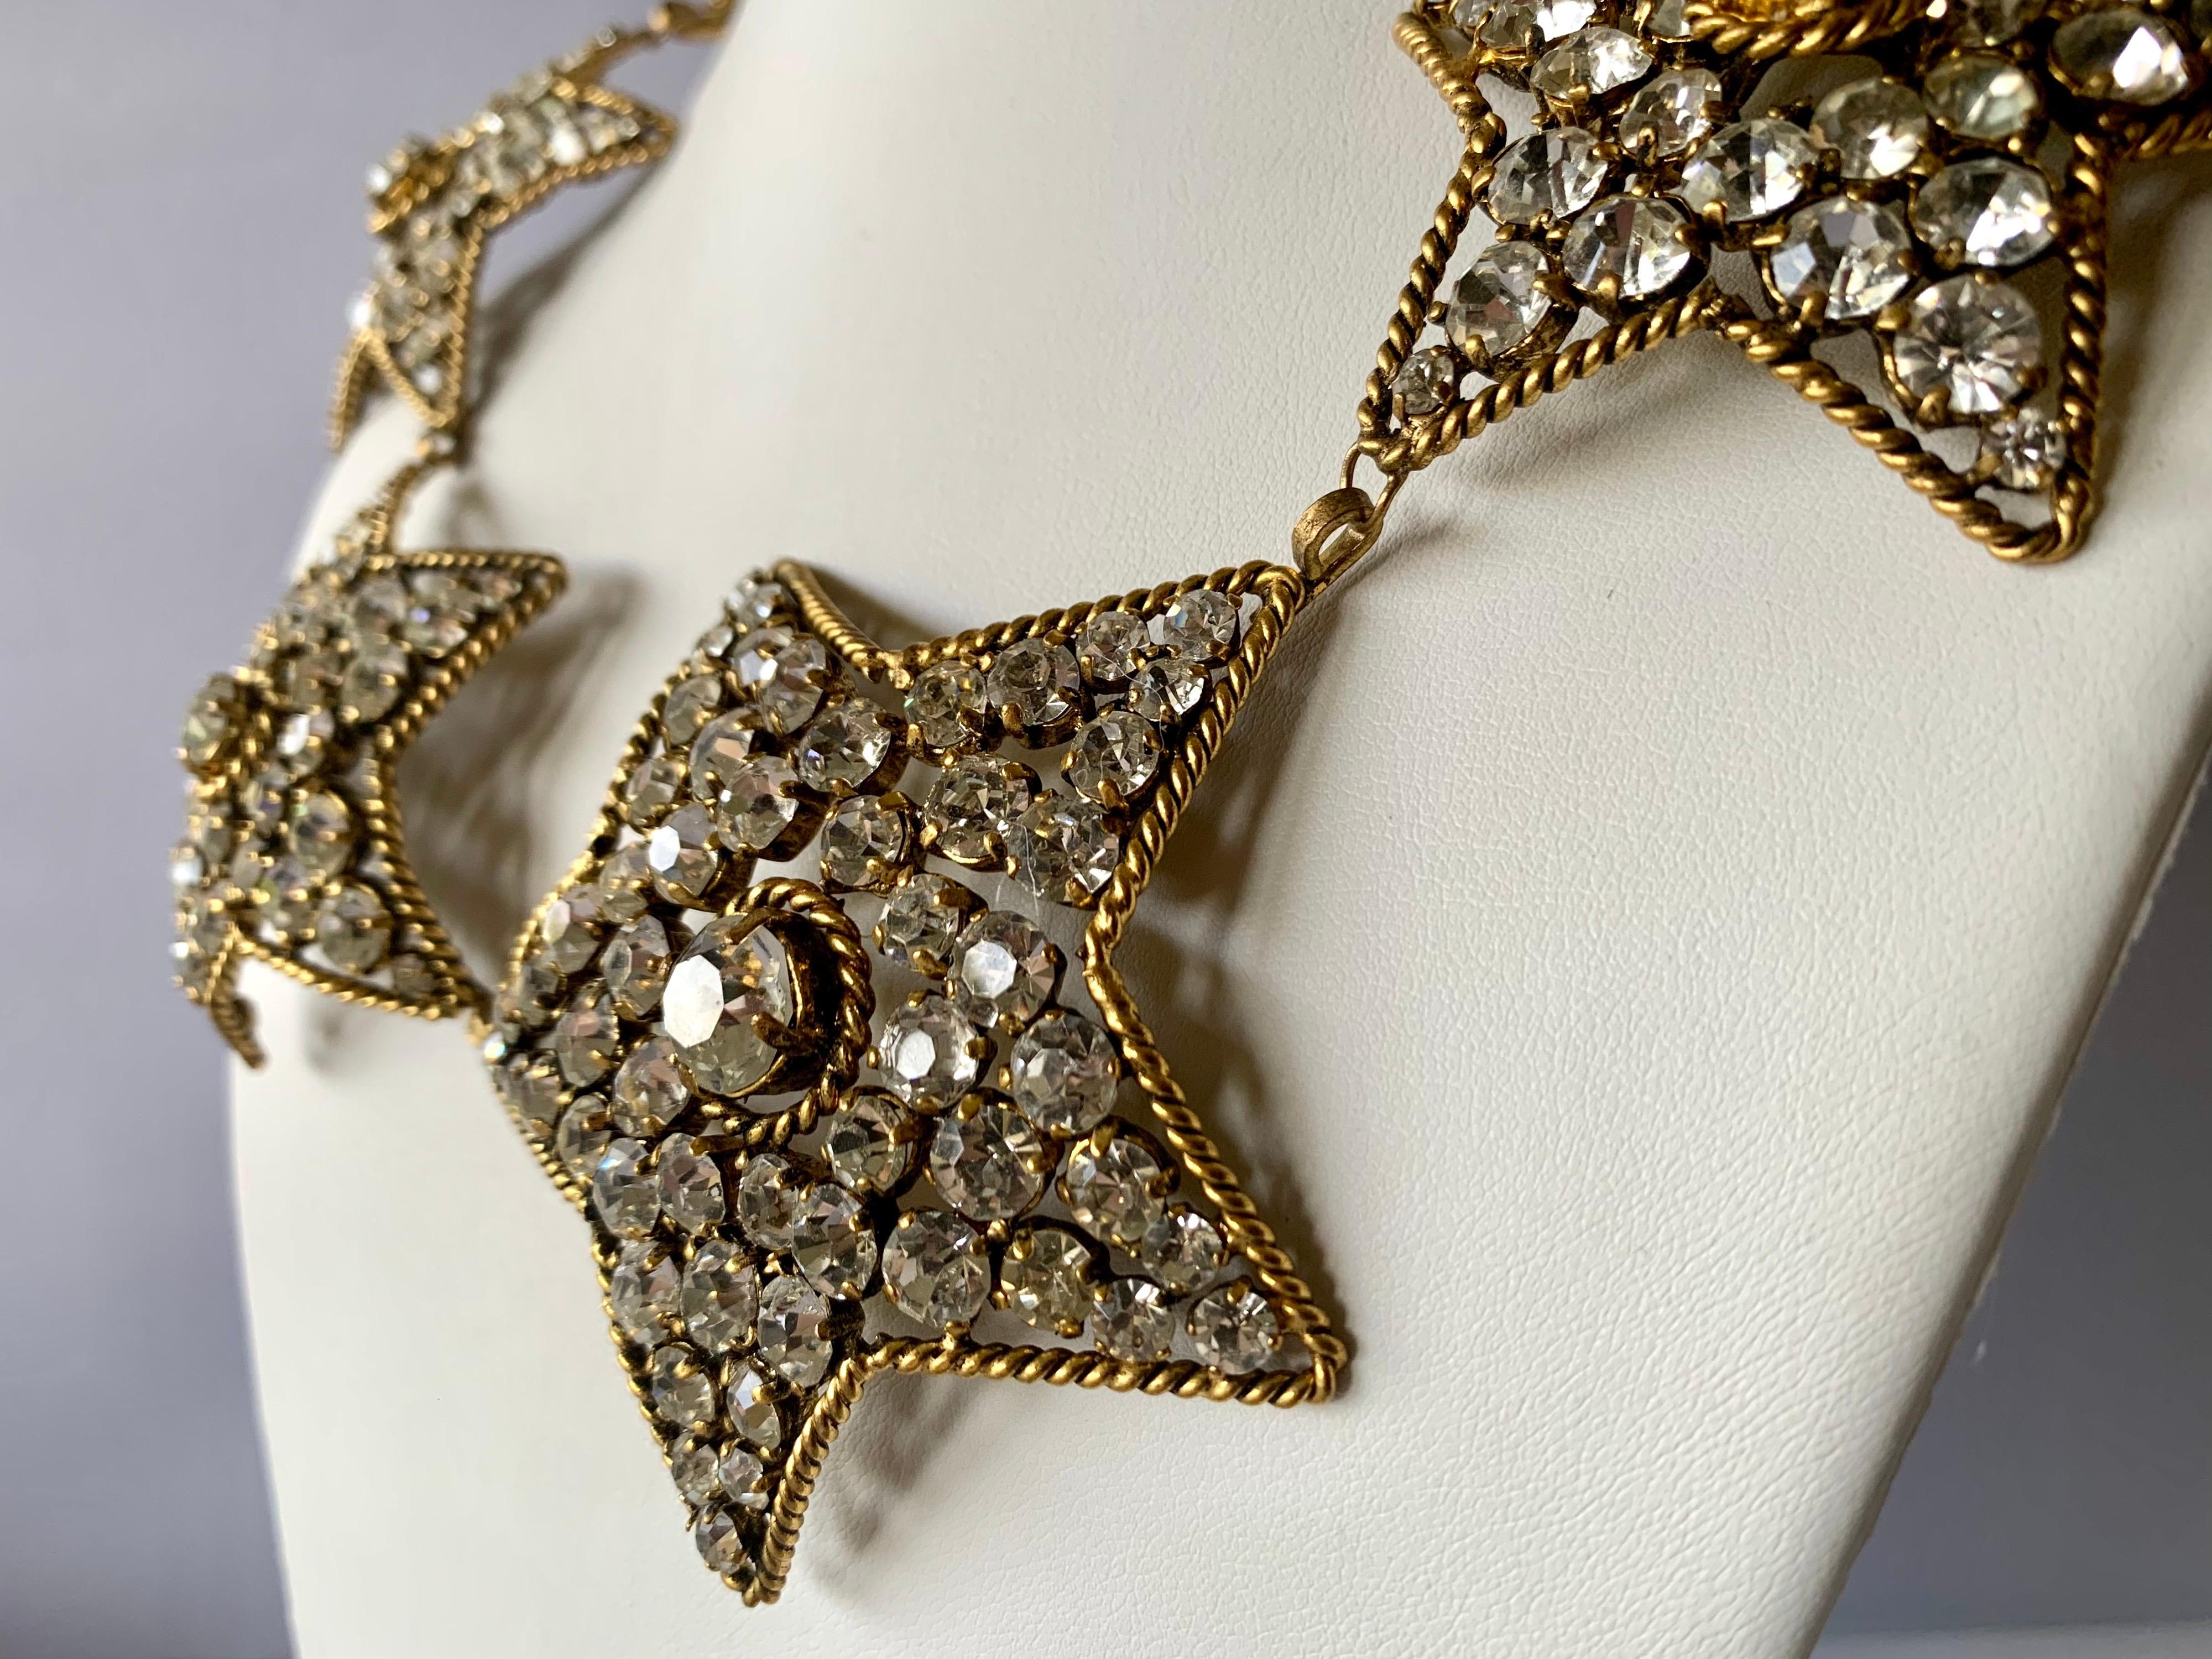 Scarce vintage Chanel three-dimensional graduating star statement necklace (from one of Karl Lagerfeld's first collections for Chanel) - comprised out of 